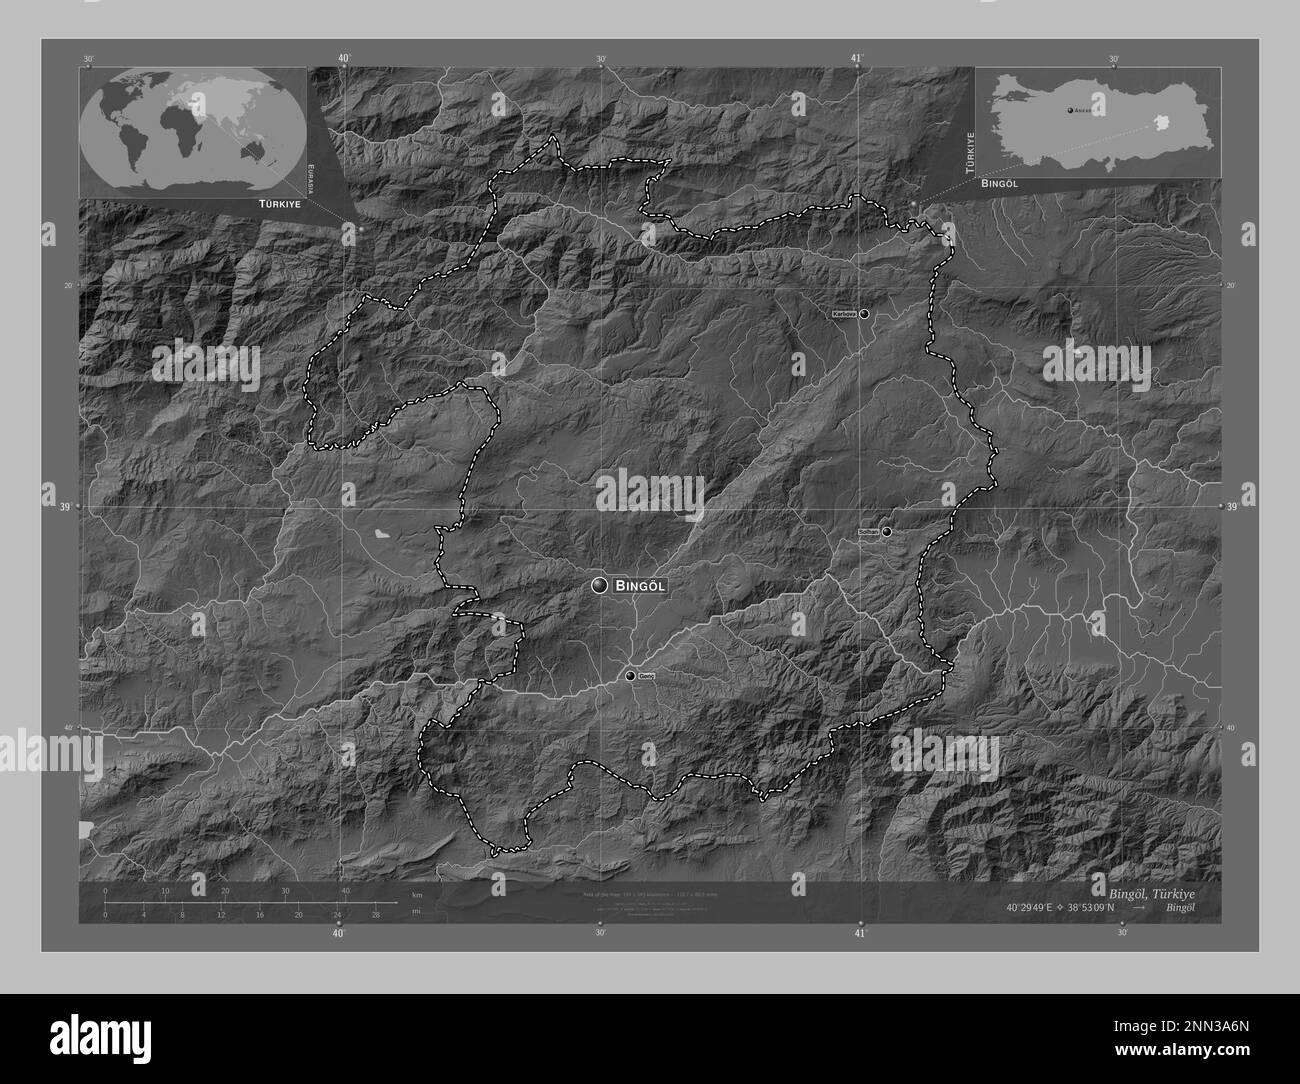 Bingol, province of Turkiye. Grayscale elevation map with lakes and rivers. Locations and names of major cities of the region. Corner auxiliary locati Stock Photo